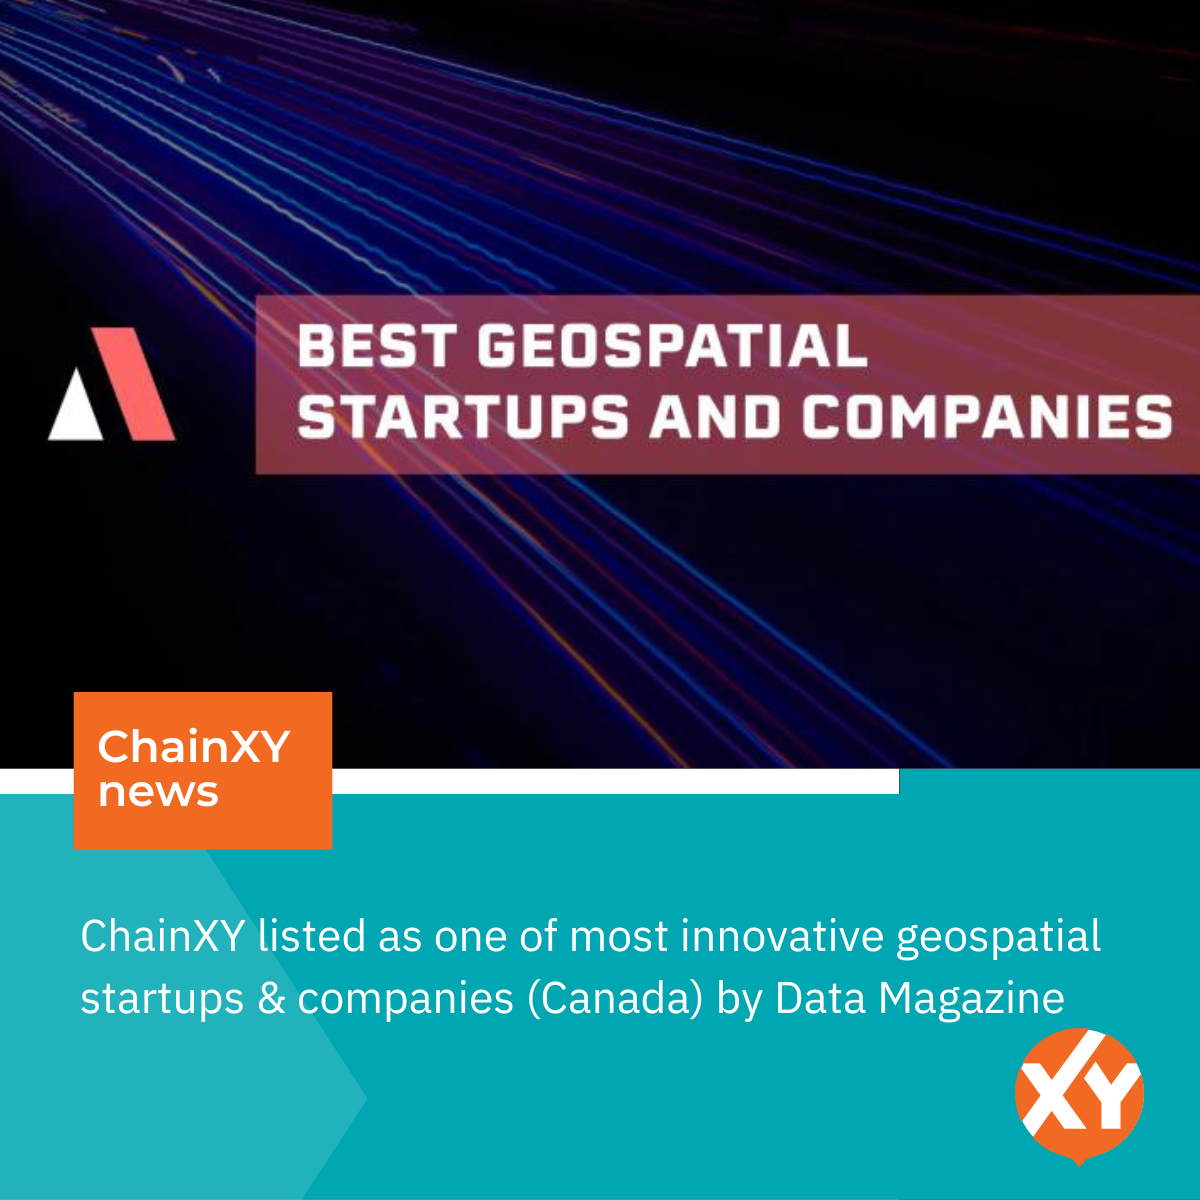 Data Magazine names ChainXY as one of top innovators in Canadian geospatial game